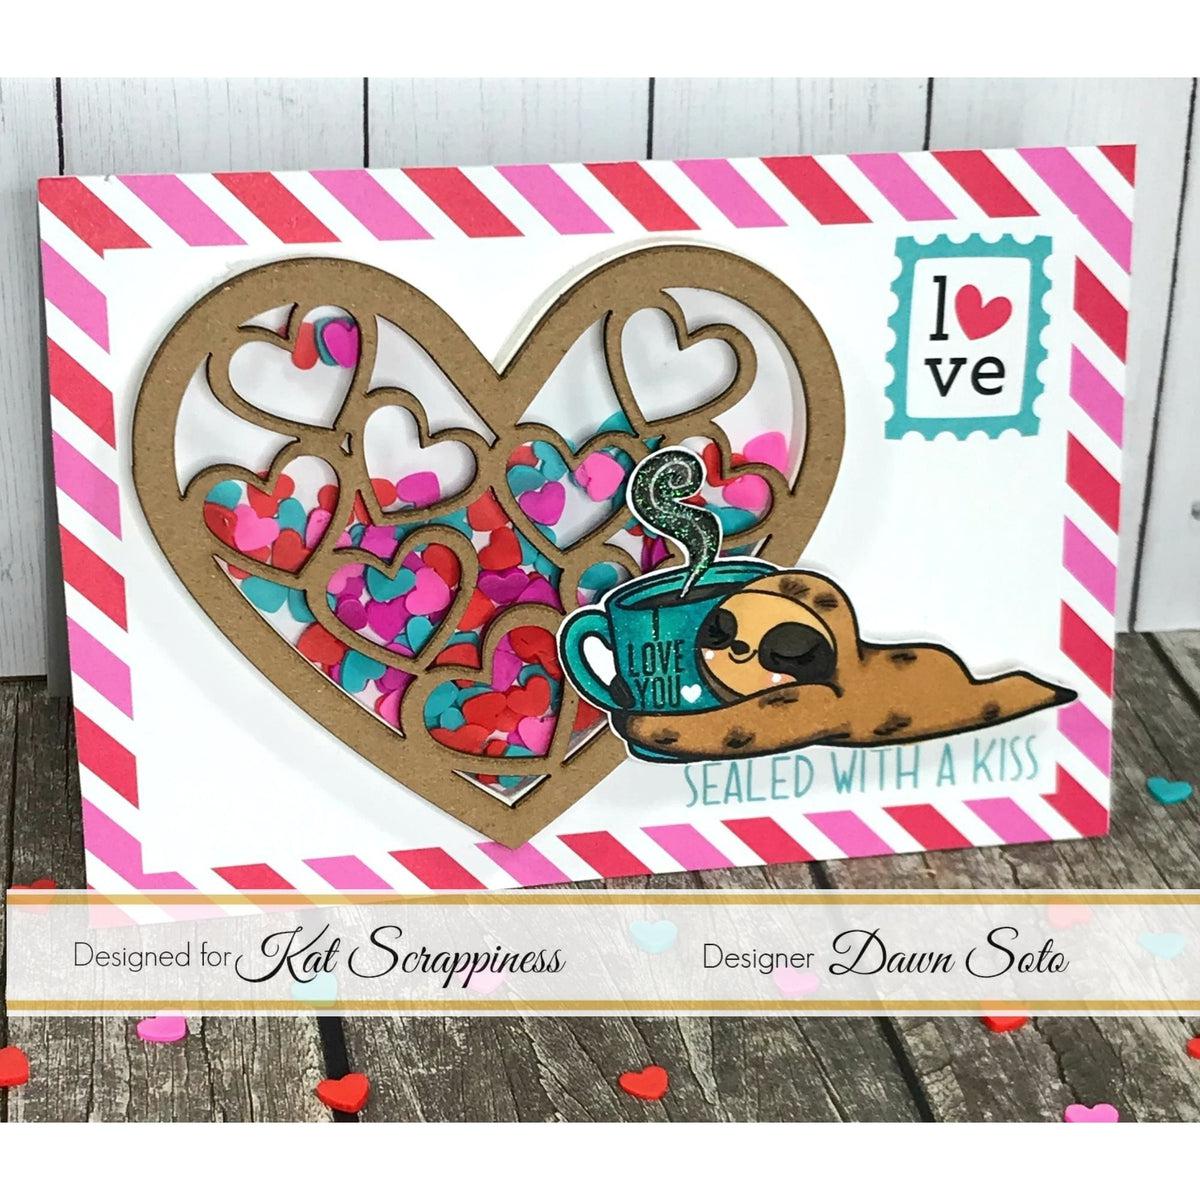 Red Heart Sprinkles by Kat Scrappiness - Kat Scrappiness